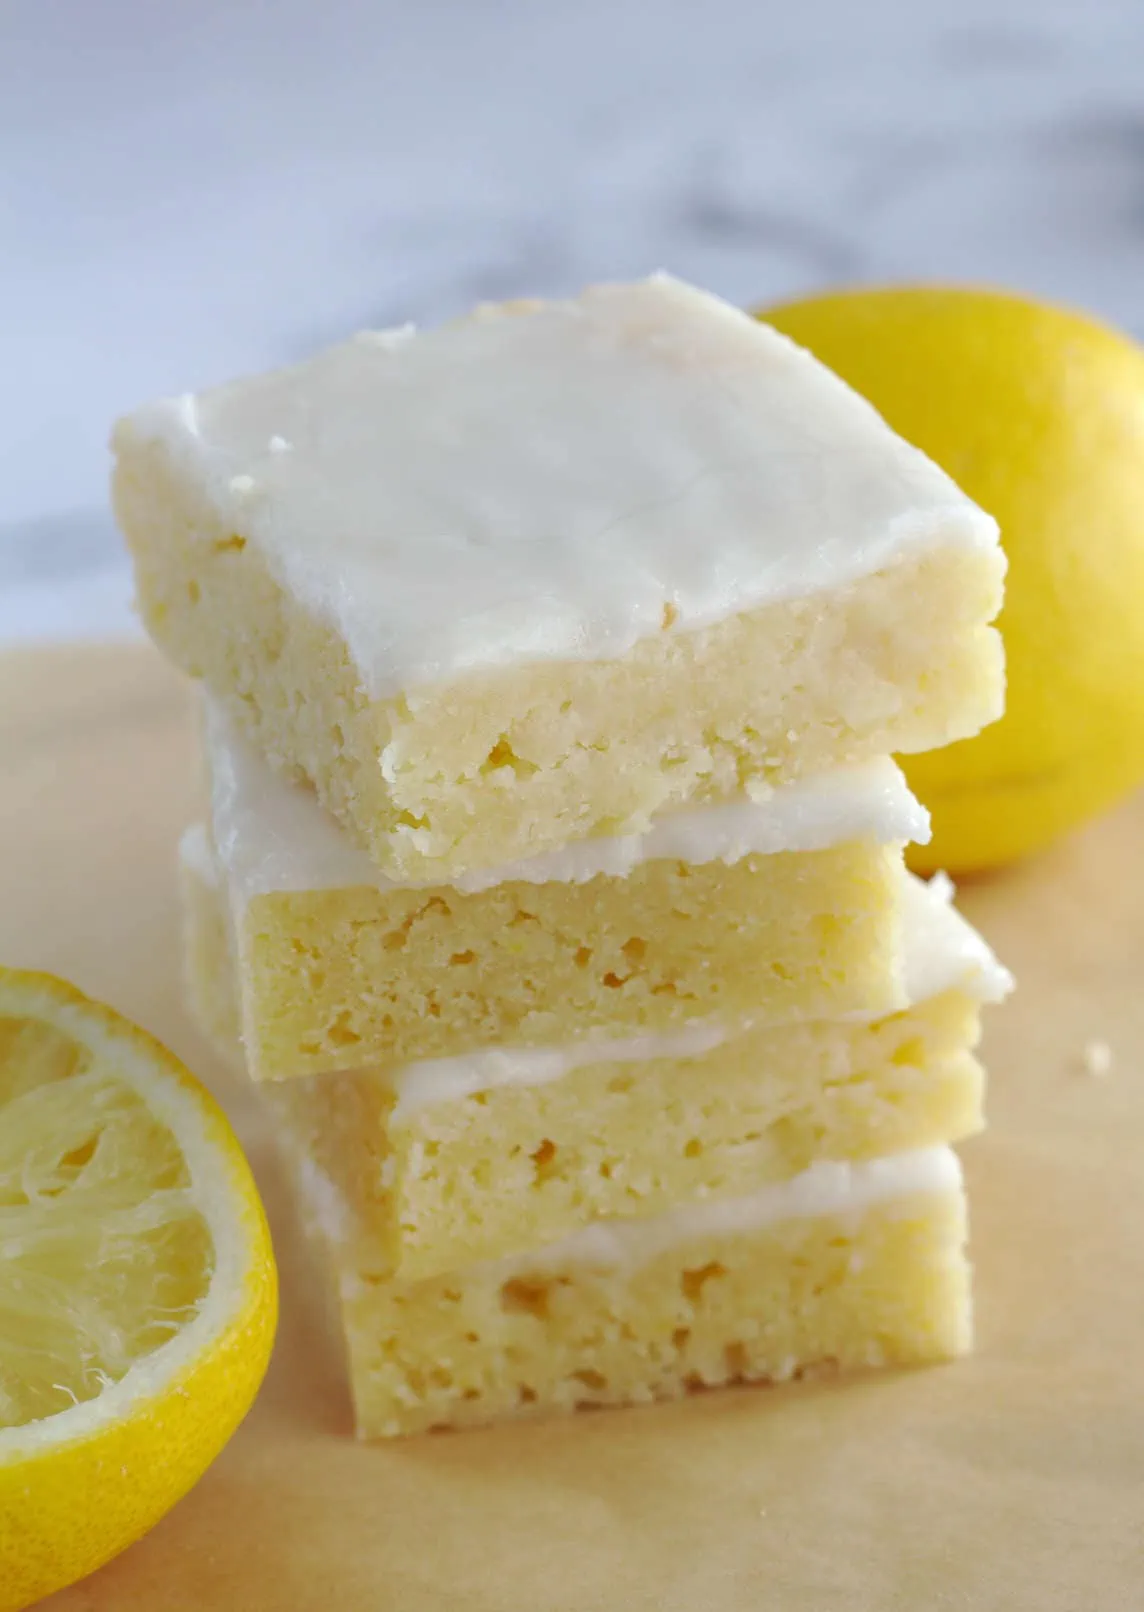 Four lemon brownies stacked on top of each other. Two lemons sit around the brownies.